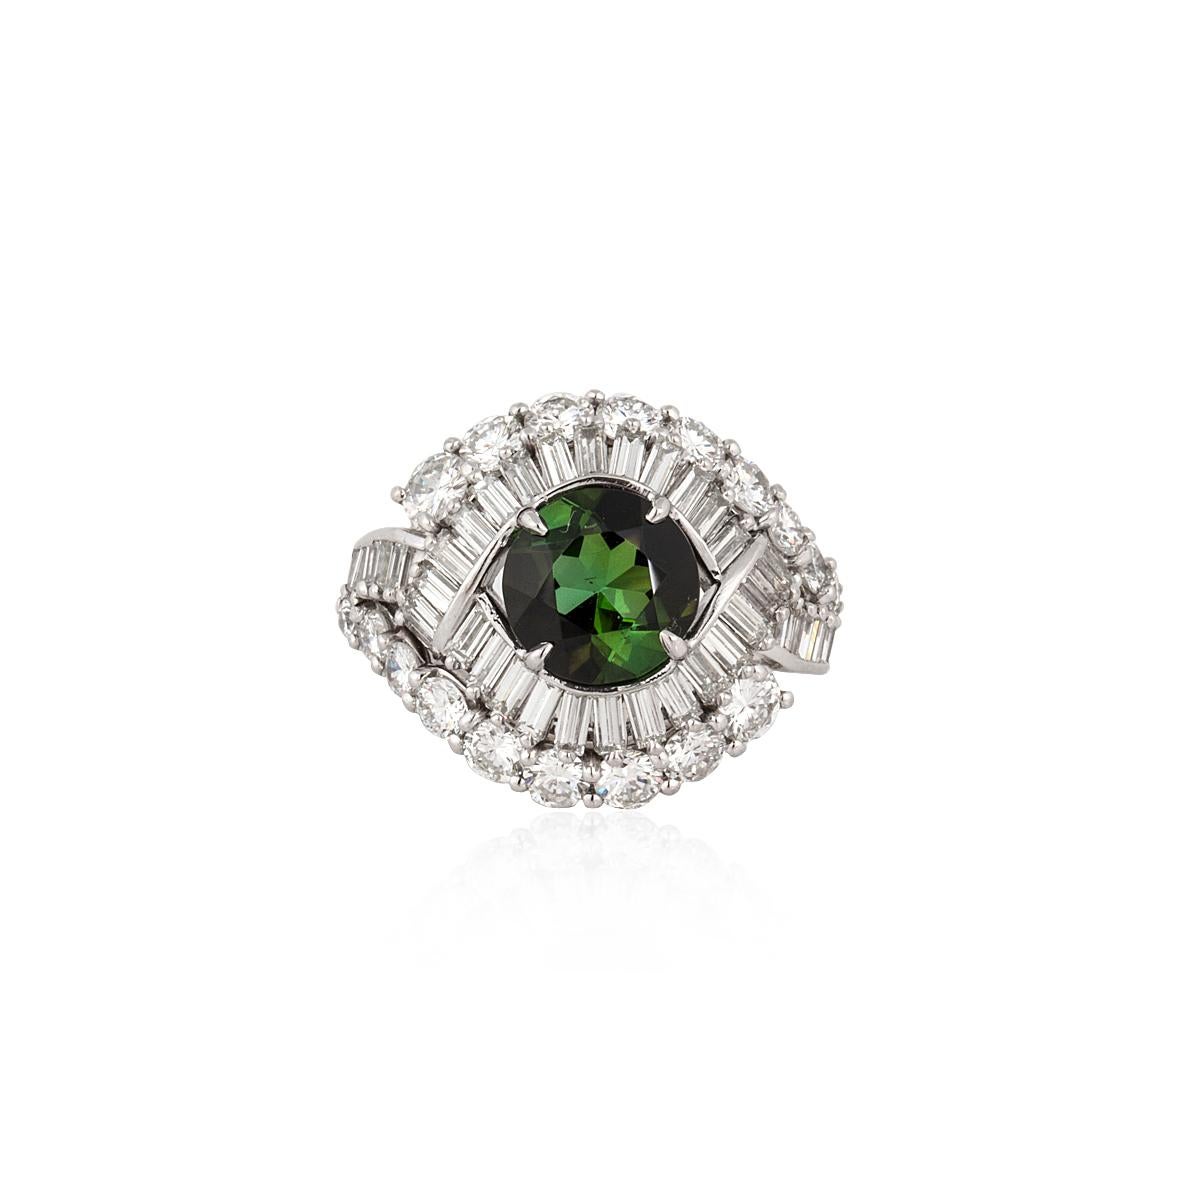 Platinum ring featuring a round green tourmaline weighing 1.80 carats, accented by round and baguette diamonds.  There are 18 round diamonds totaling 1.60 carats; G-H color and VVS2-VS2 clarity and 38 baguette diamonds totaling 1.40 carats; G-H